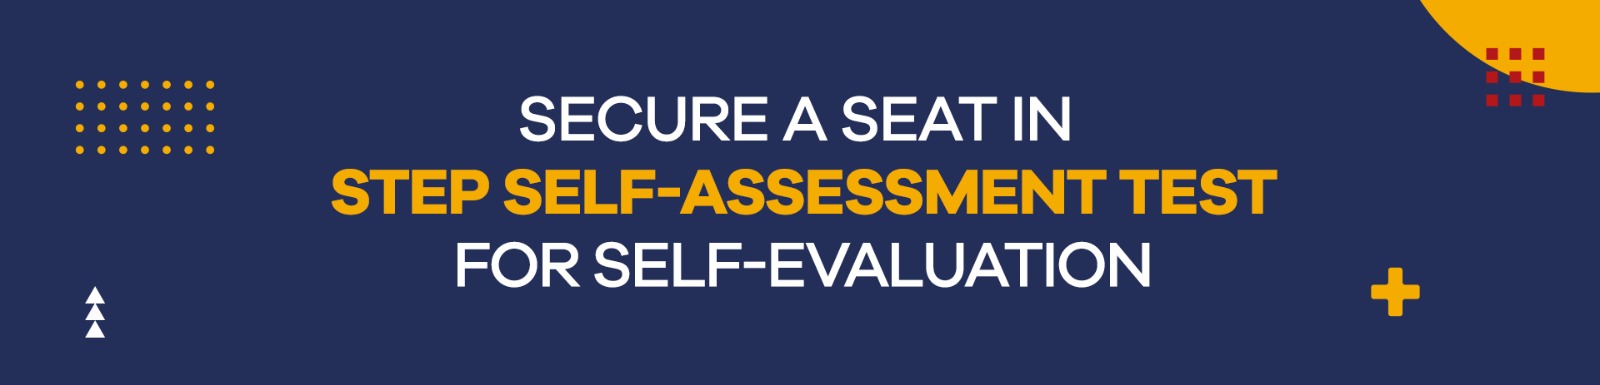 Secure A Seat in STEP Self-Assessment Test for Self-Evaluation